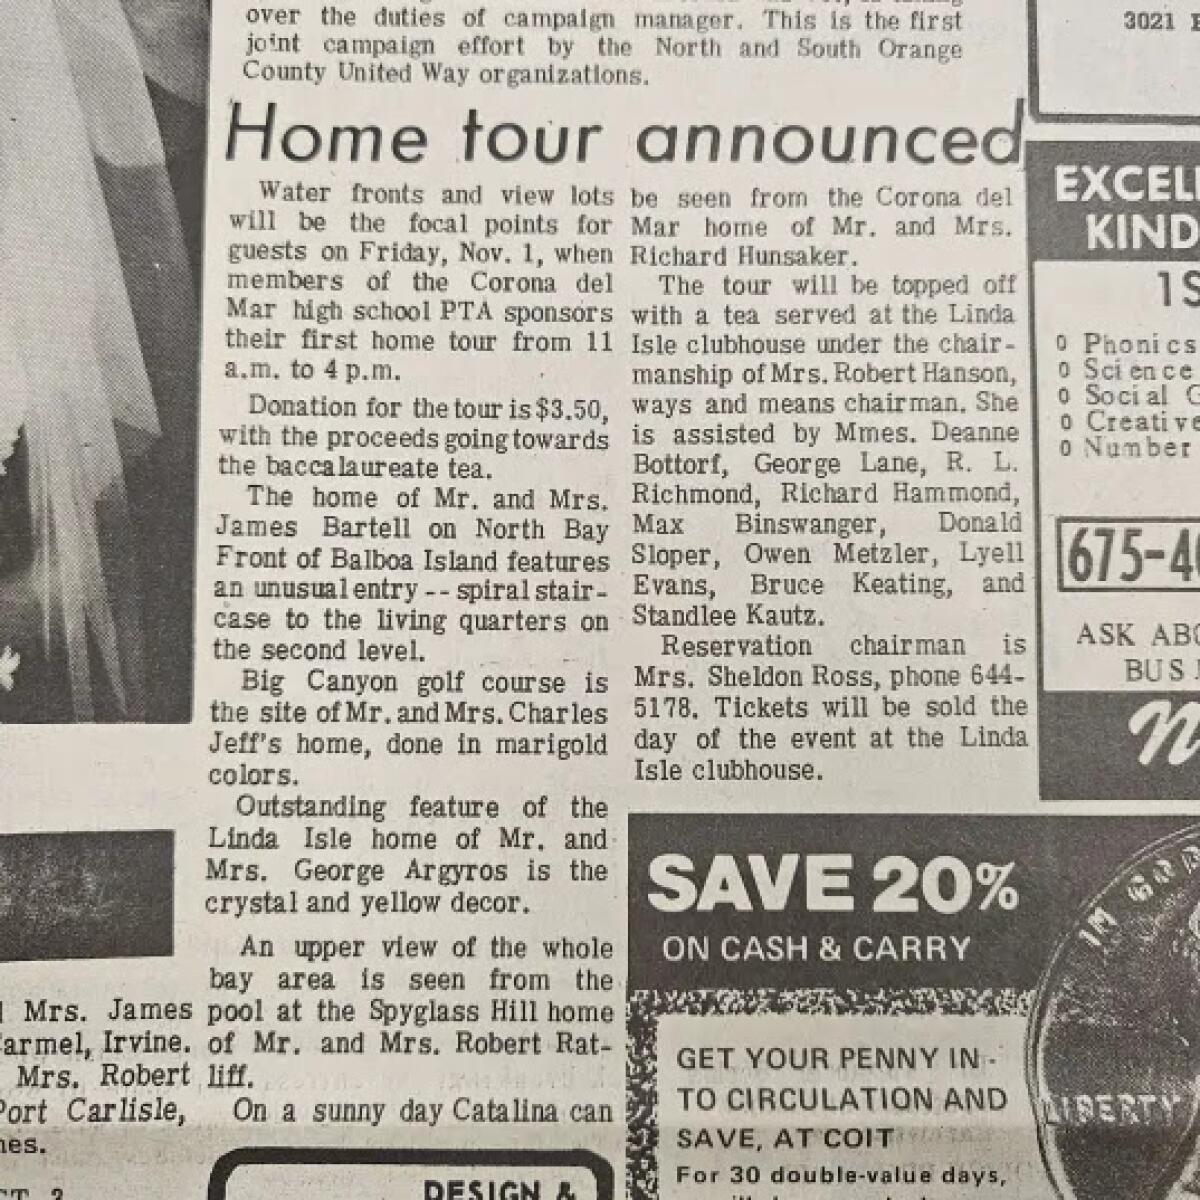 An article announcing the first Corona del Mar Home Tour was in an October 1974 edition.